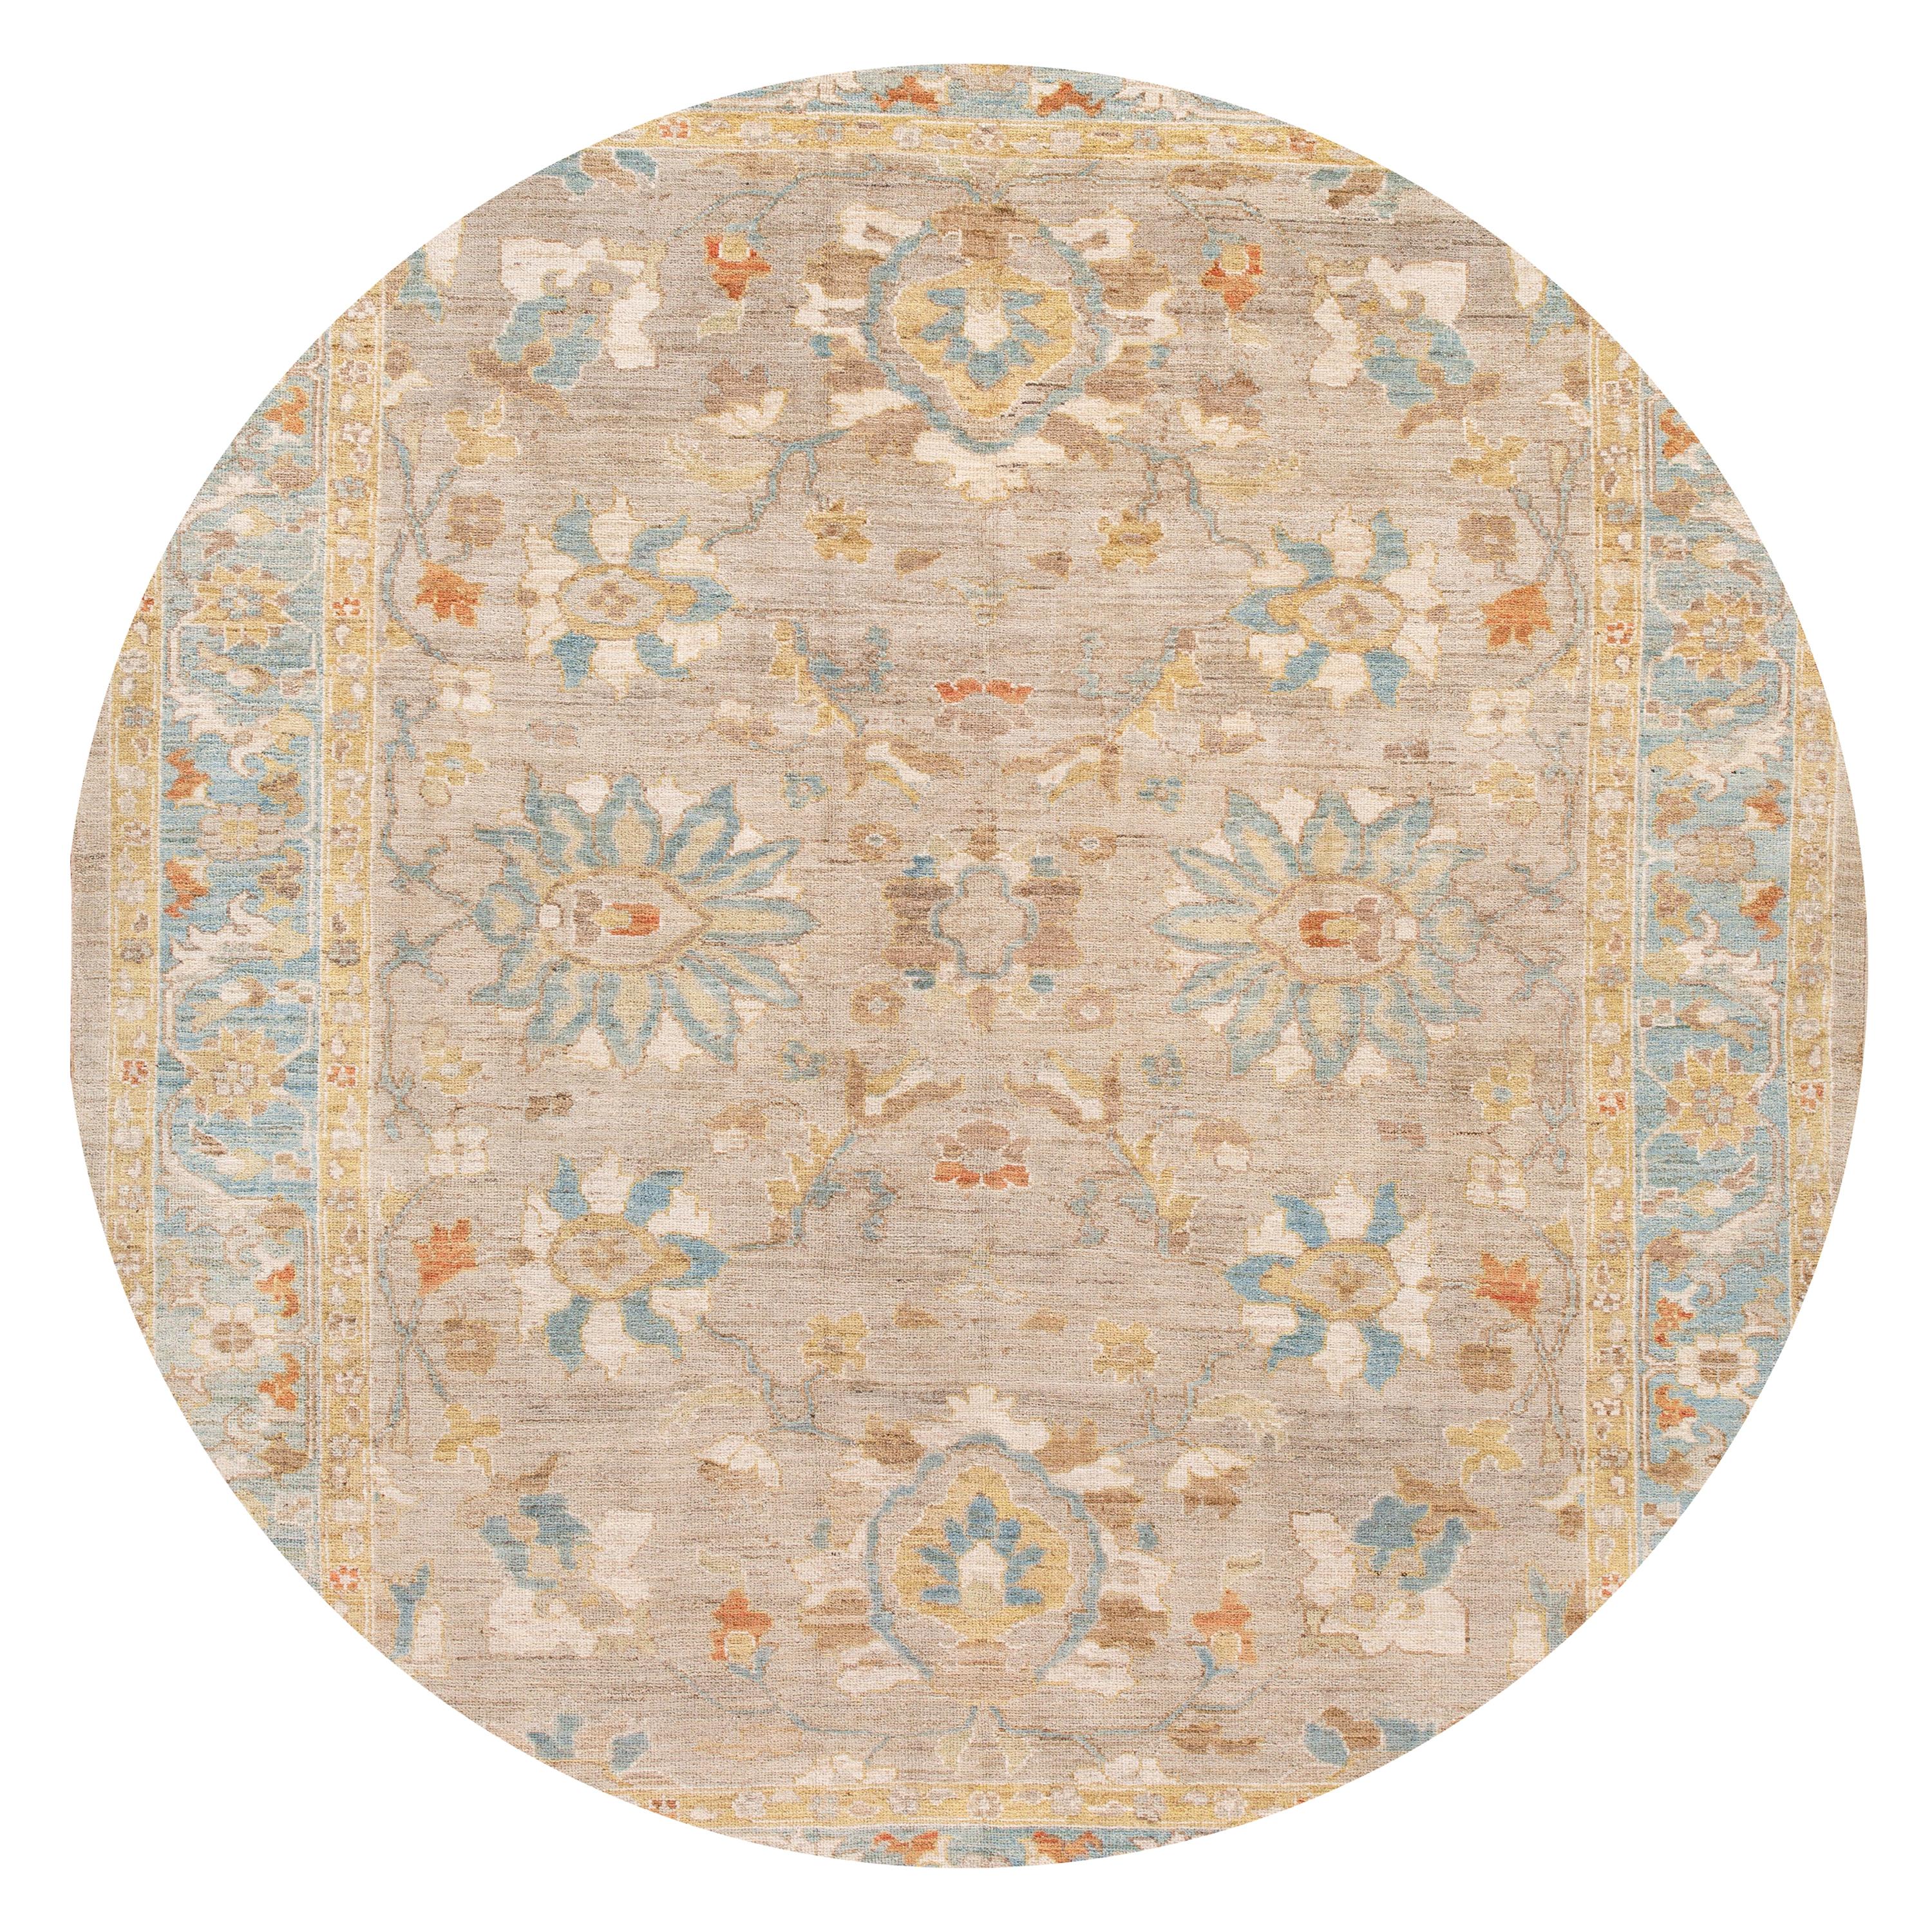 Beautiful contemporary Sultanabad rug, hand knotted wool with a tan field, blue and ivory accents in an all-over design.
This rug measures: 8'8